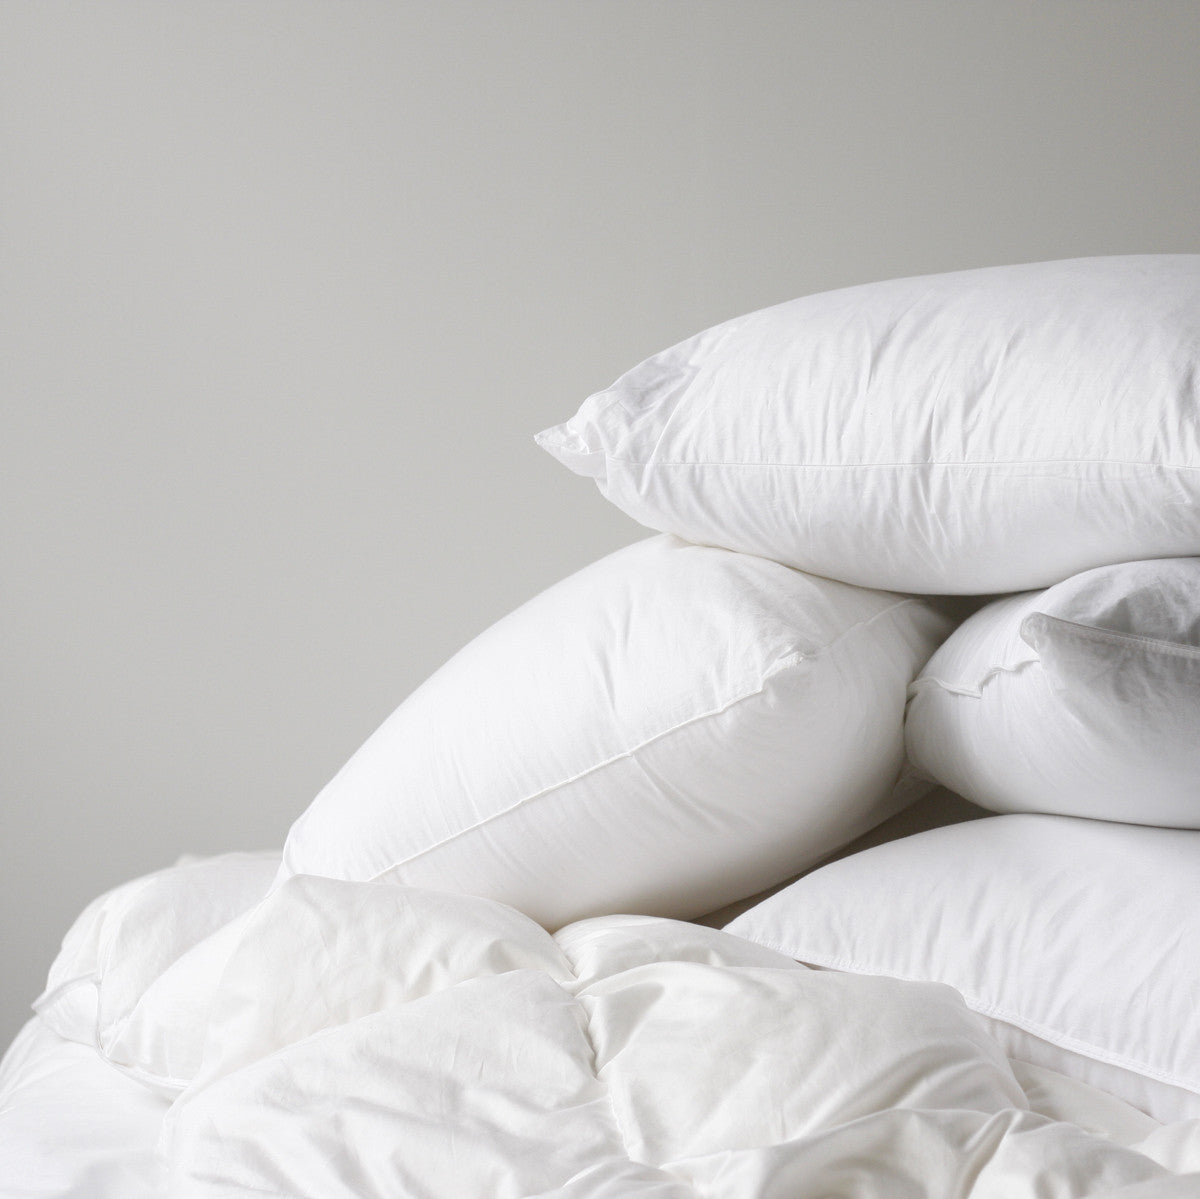 Episode 33: When to replace your sleeping pillow?